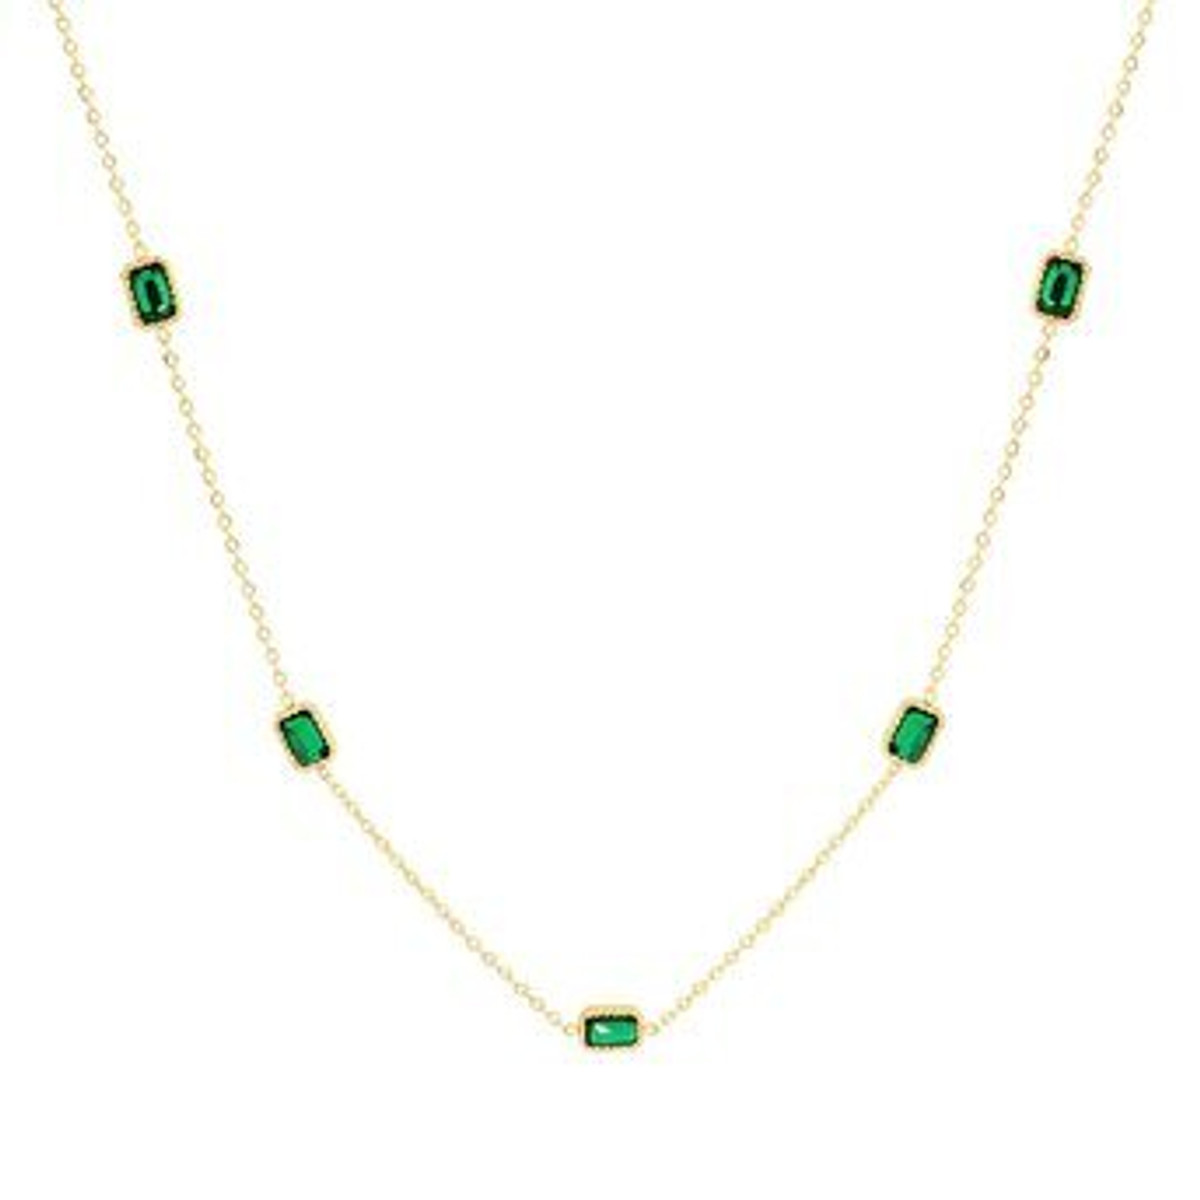 Lūceō Exquisite, 18K gold plated Stainless steel necklace